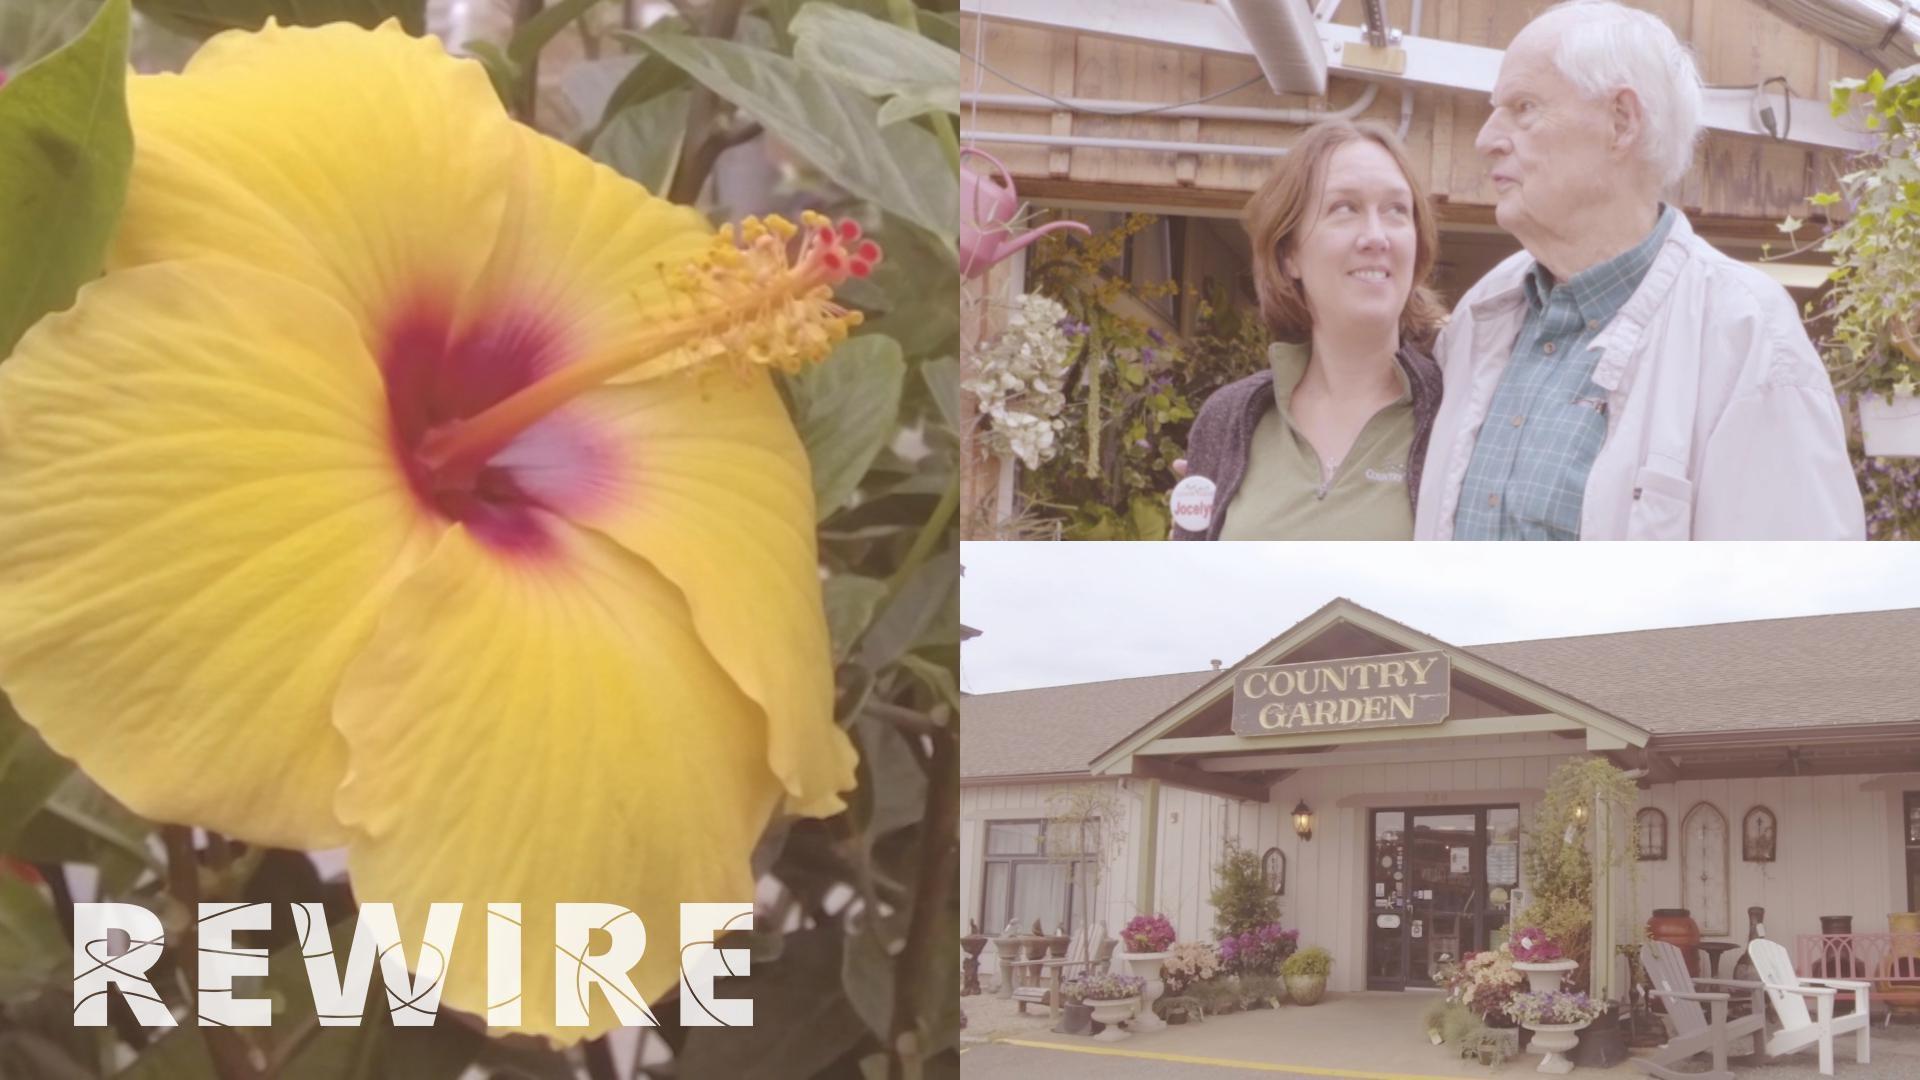 Rewire Hyannis Country Garden Is A Family Business With Deep Roots Pbs